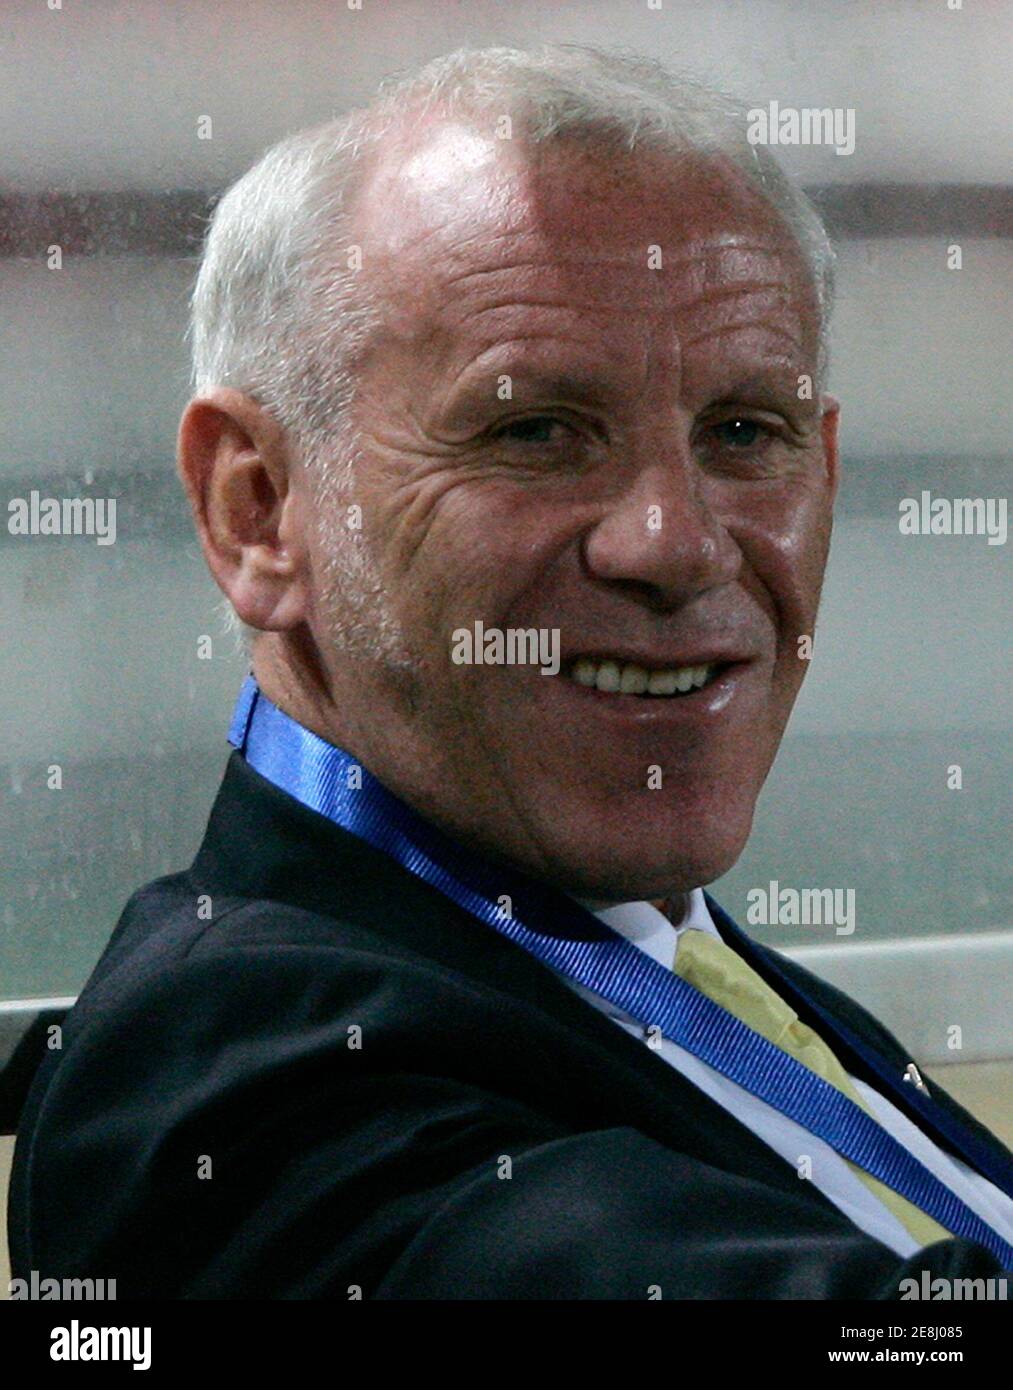 Thailand's soccer coach Peter Reid smiles during the Asean Football Federation Suzuki Cup 2008 semi-final soccer match between Thailand and Indonesia at the Rajamangala national stadium in Bangkok December 20, 2008. REUTERS/Chaiwat Subprasom (THAILAND) Stock Photo